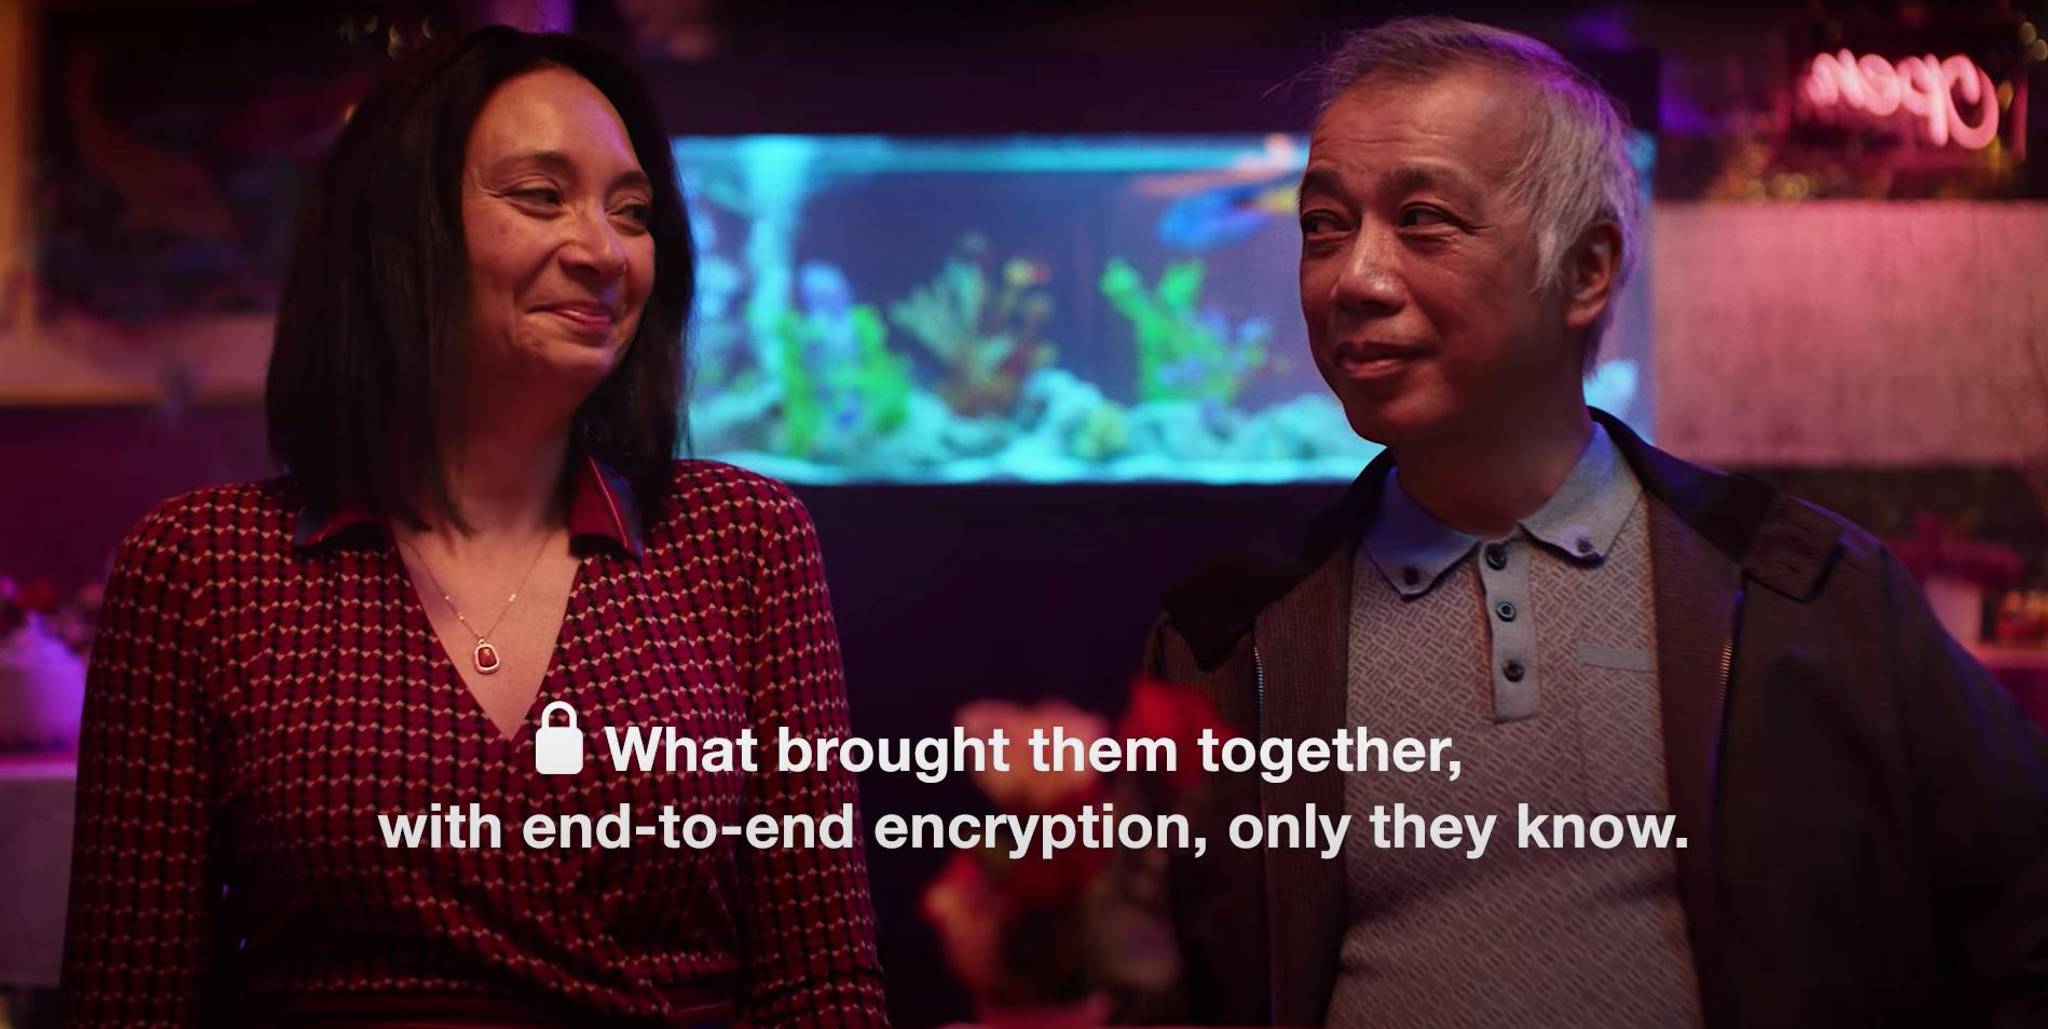 Whatsapp campaign wants to bust privacy myths